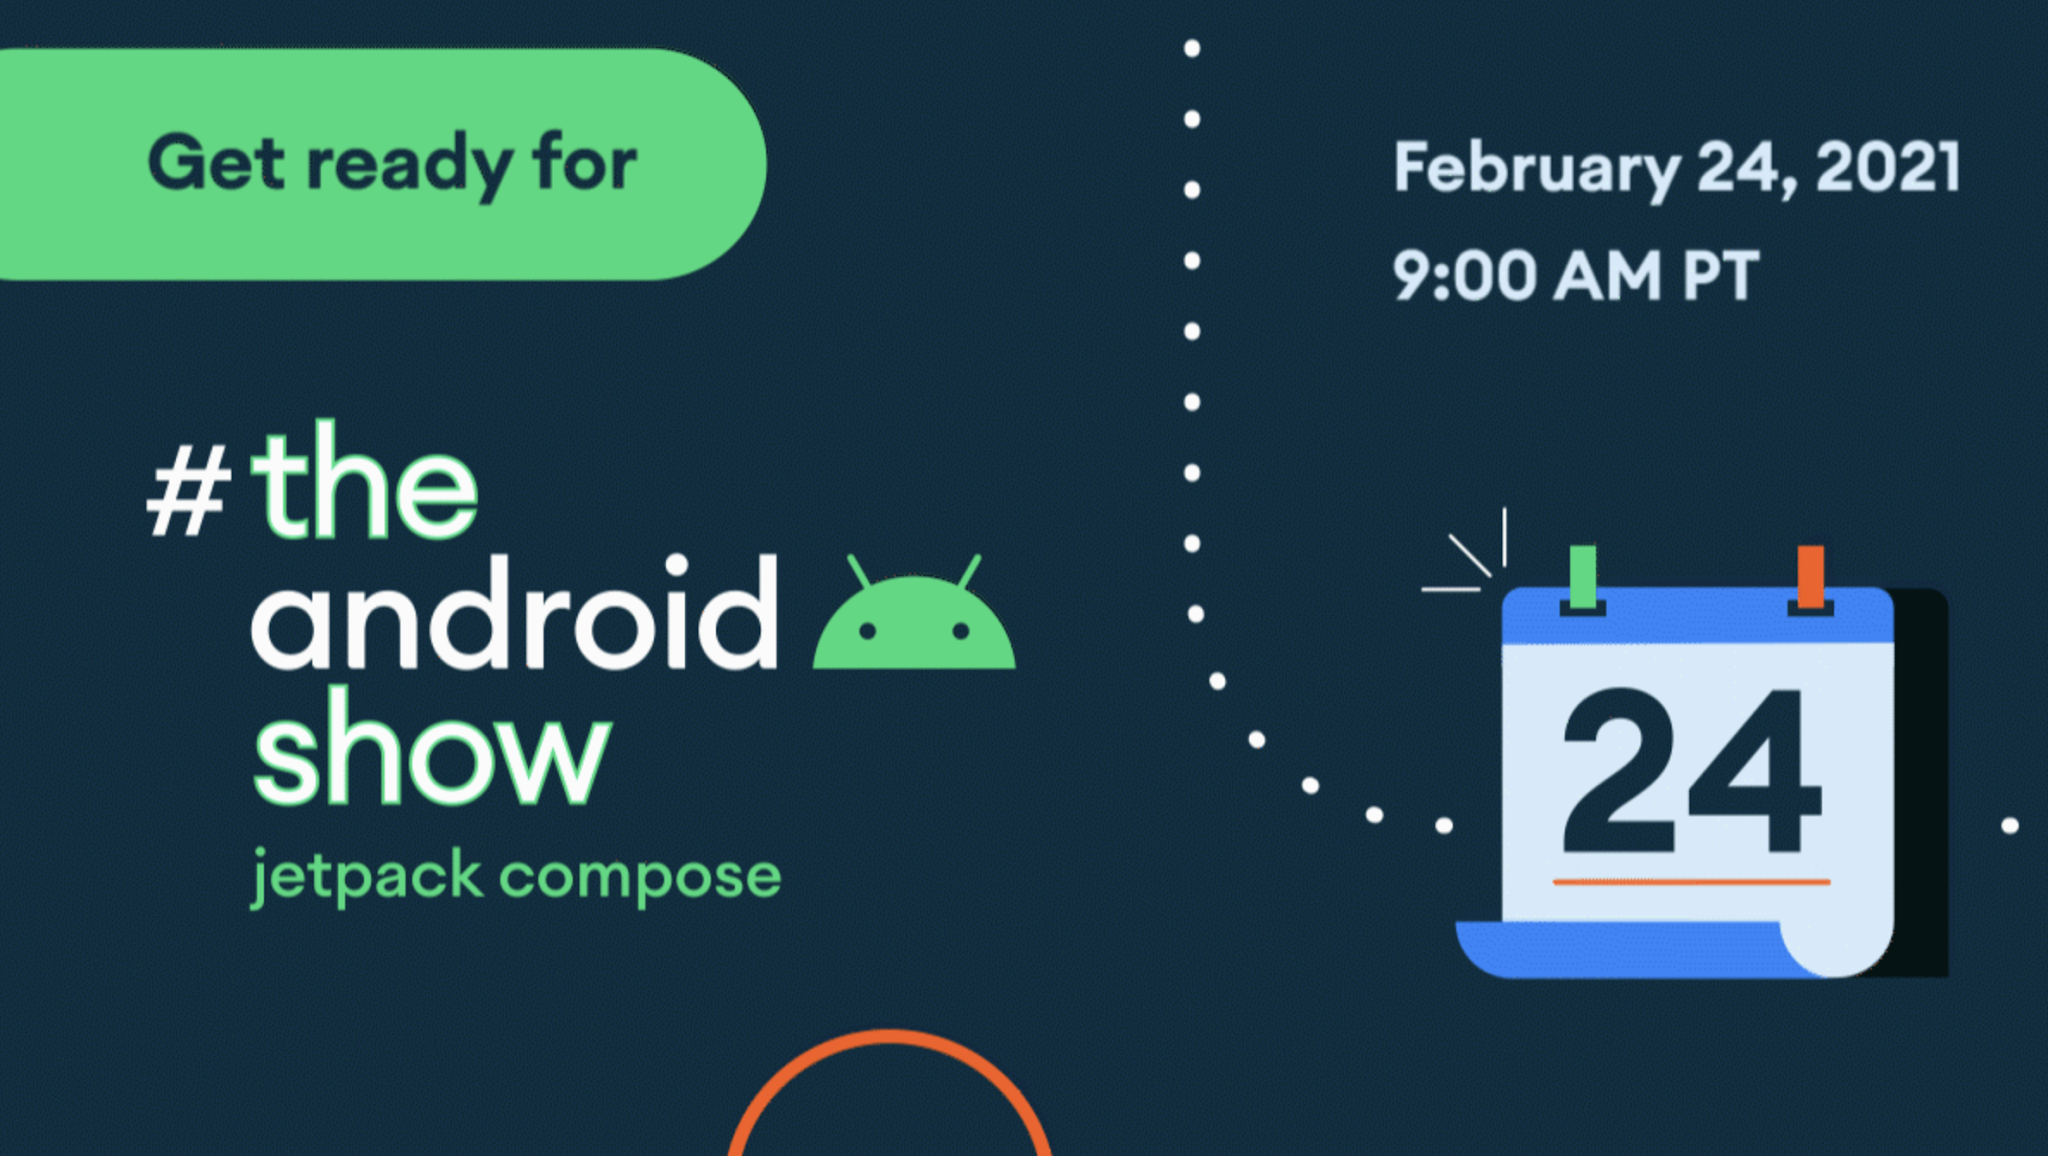 Here's how to watch #TheAndroidShow in just under 24 hours